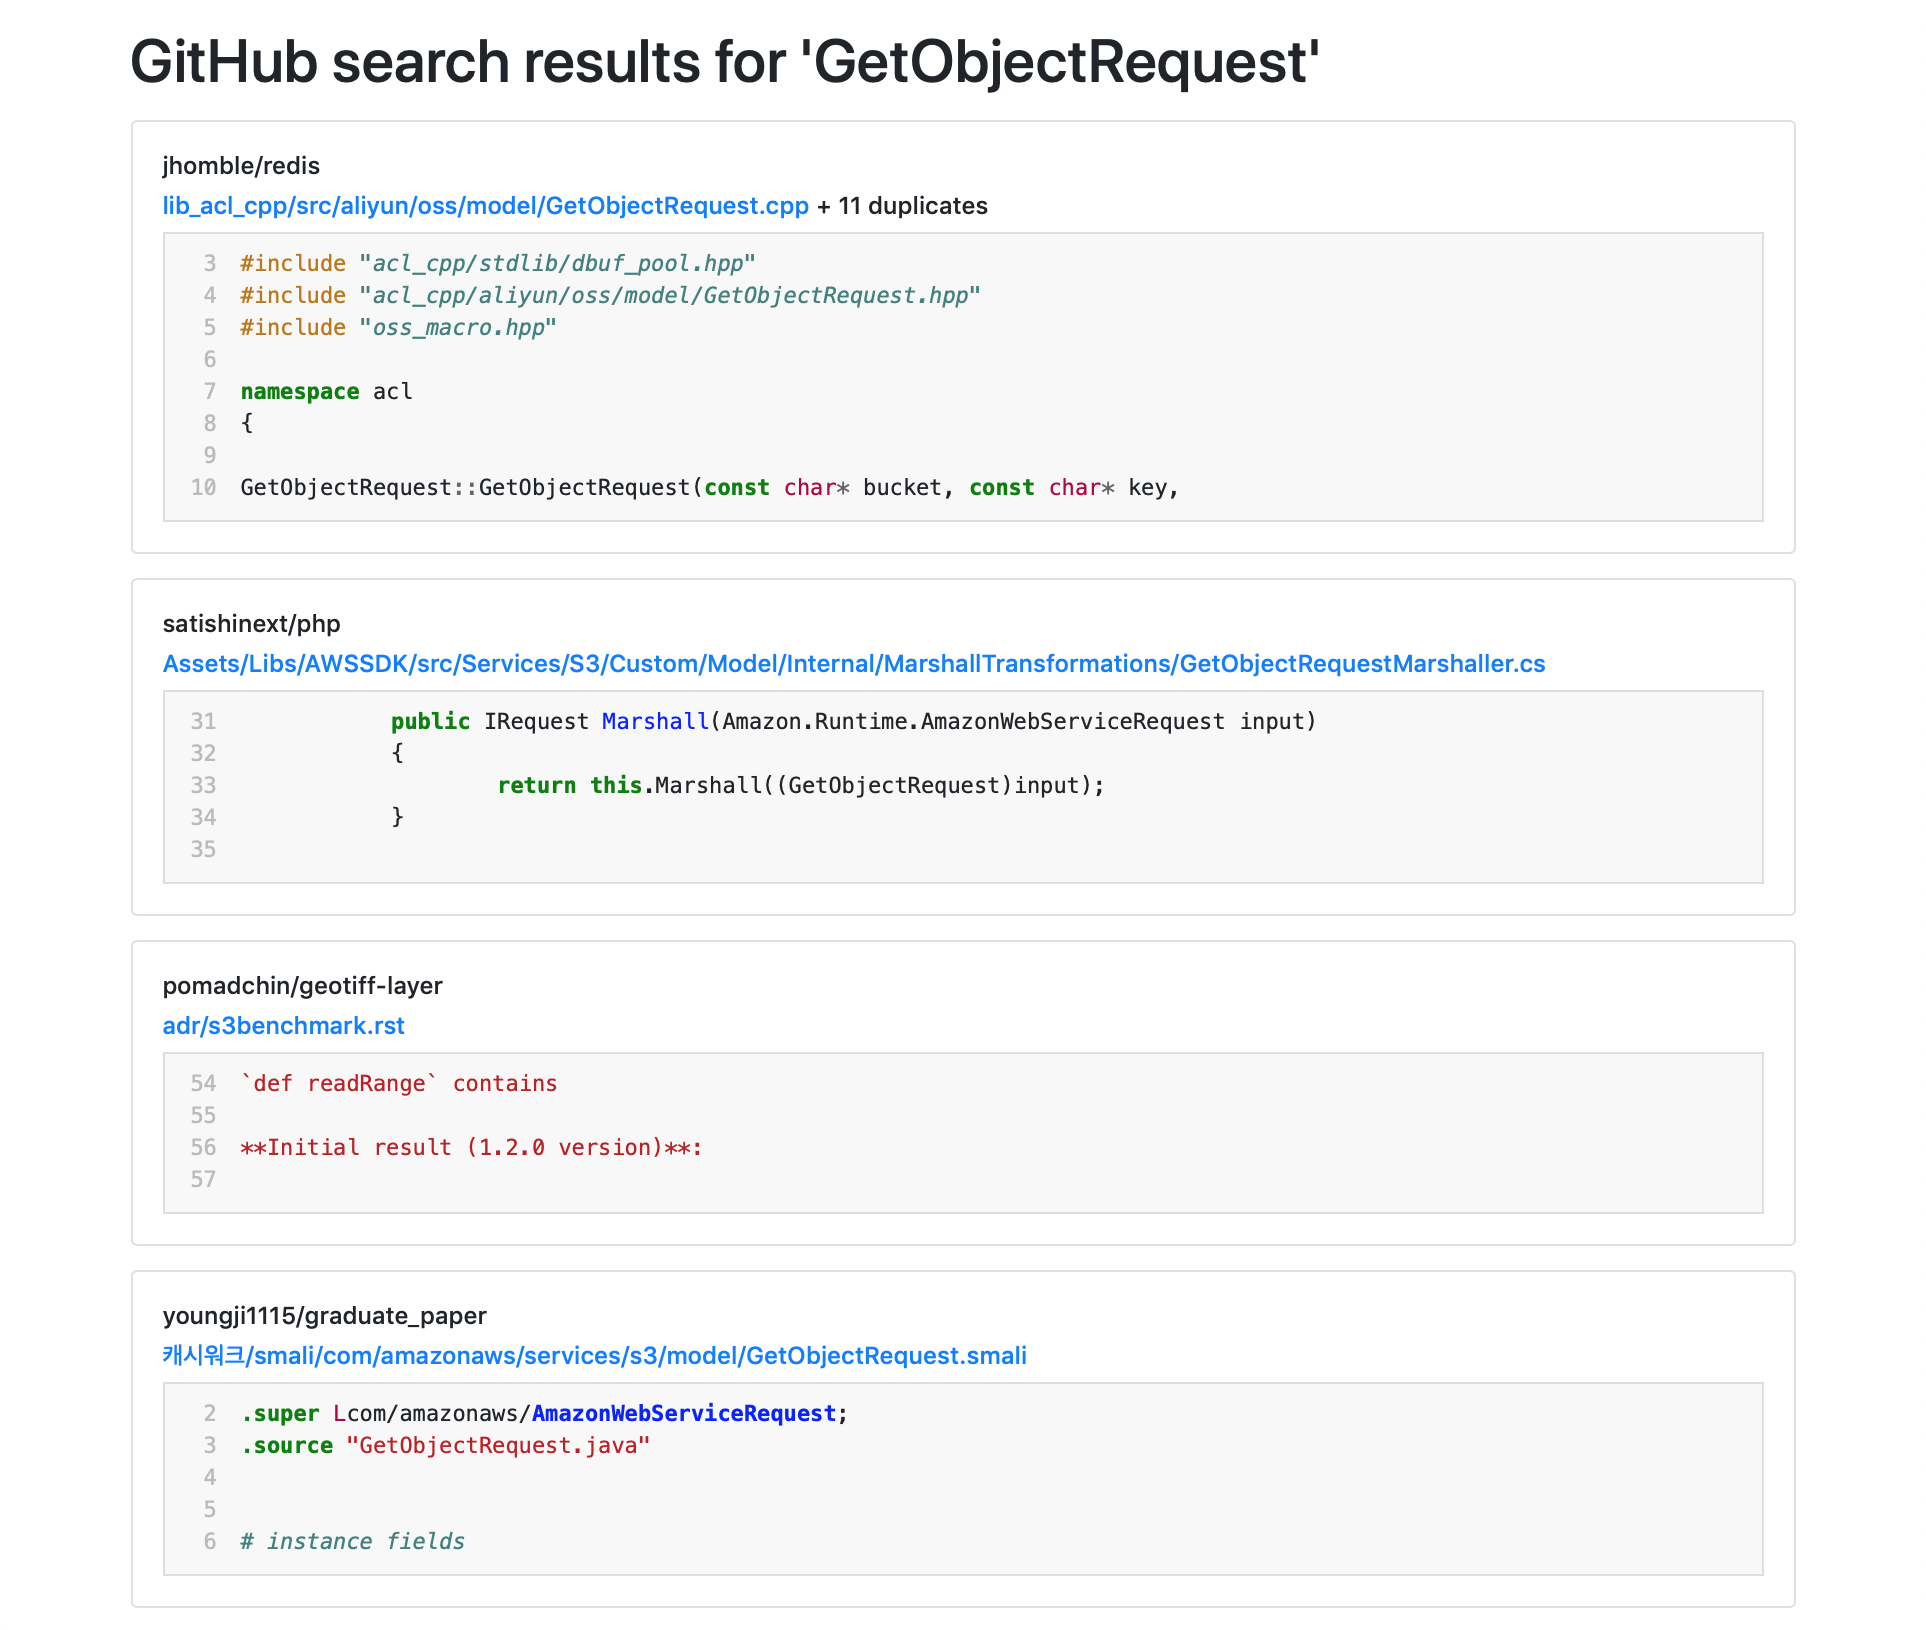 A page of search results, with a snippet of code accompanying each search result.